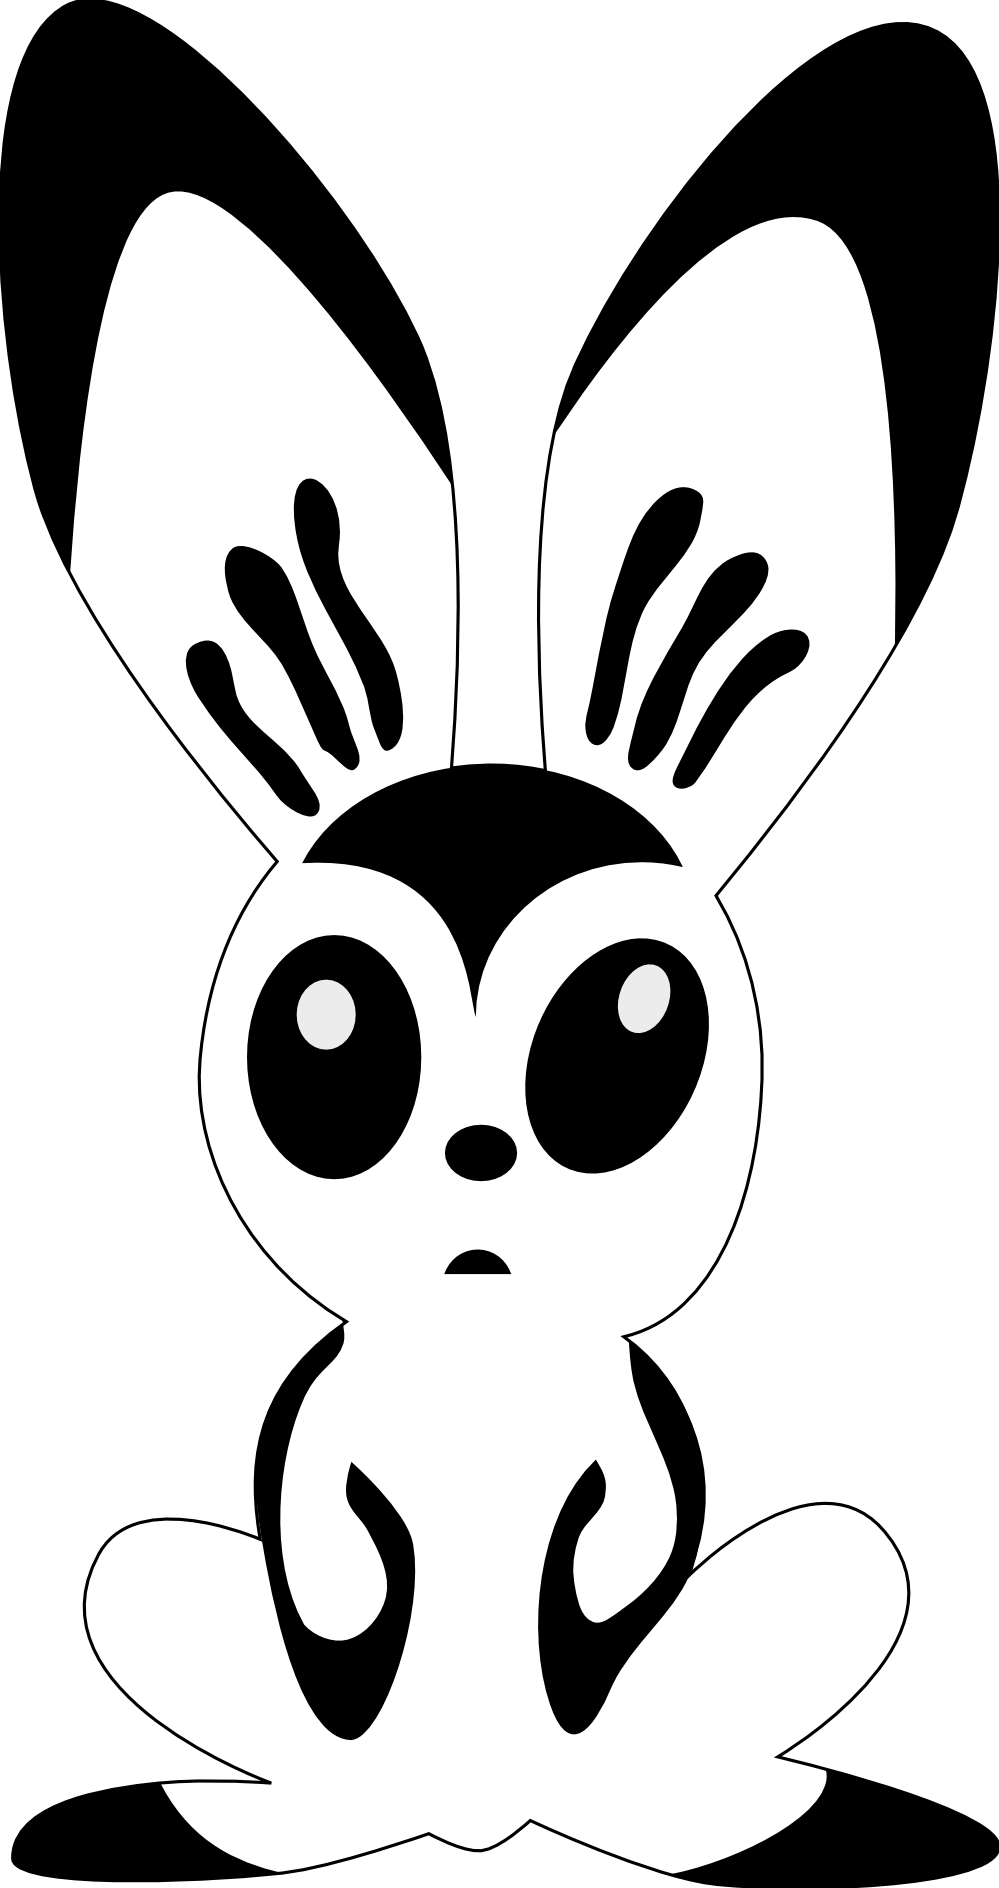 Bunny  black and white bunny clipart black and white free images 6